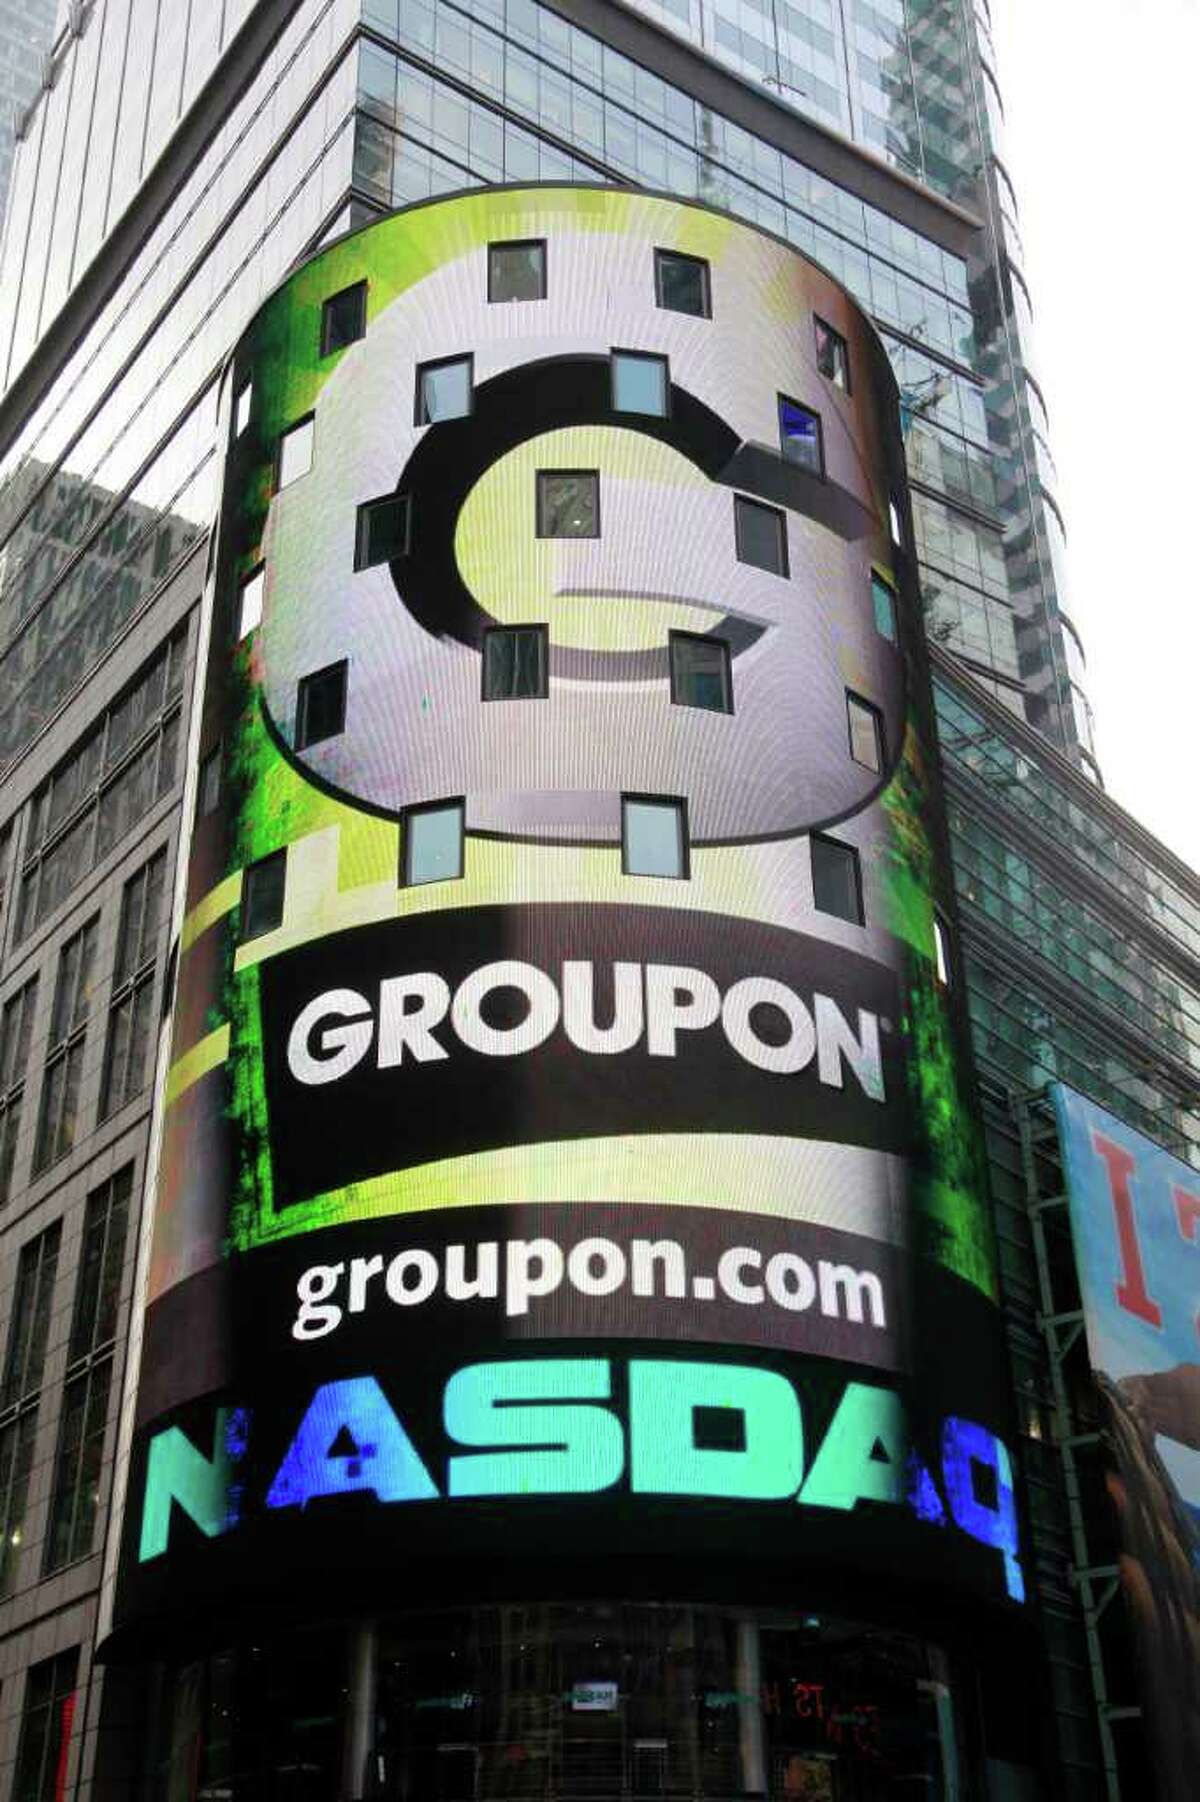 A display for Groupon was up at Nasdaq last year. The company has had to restate its revenue for the fourth quarter, the first period since becoming a public company. Some experts are questioning its internal controls.